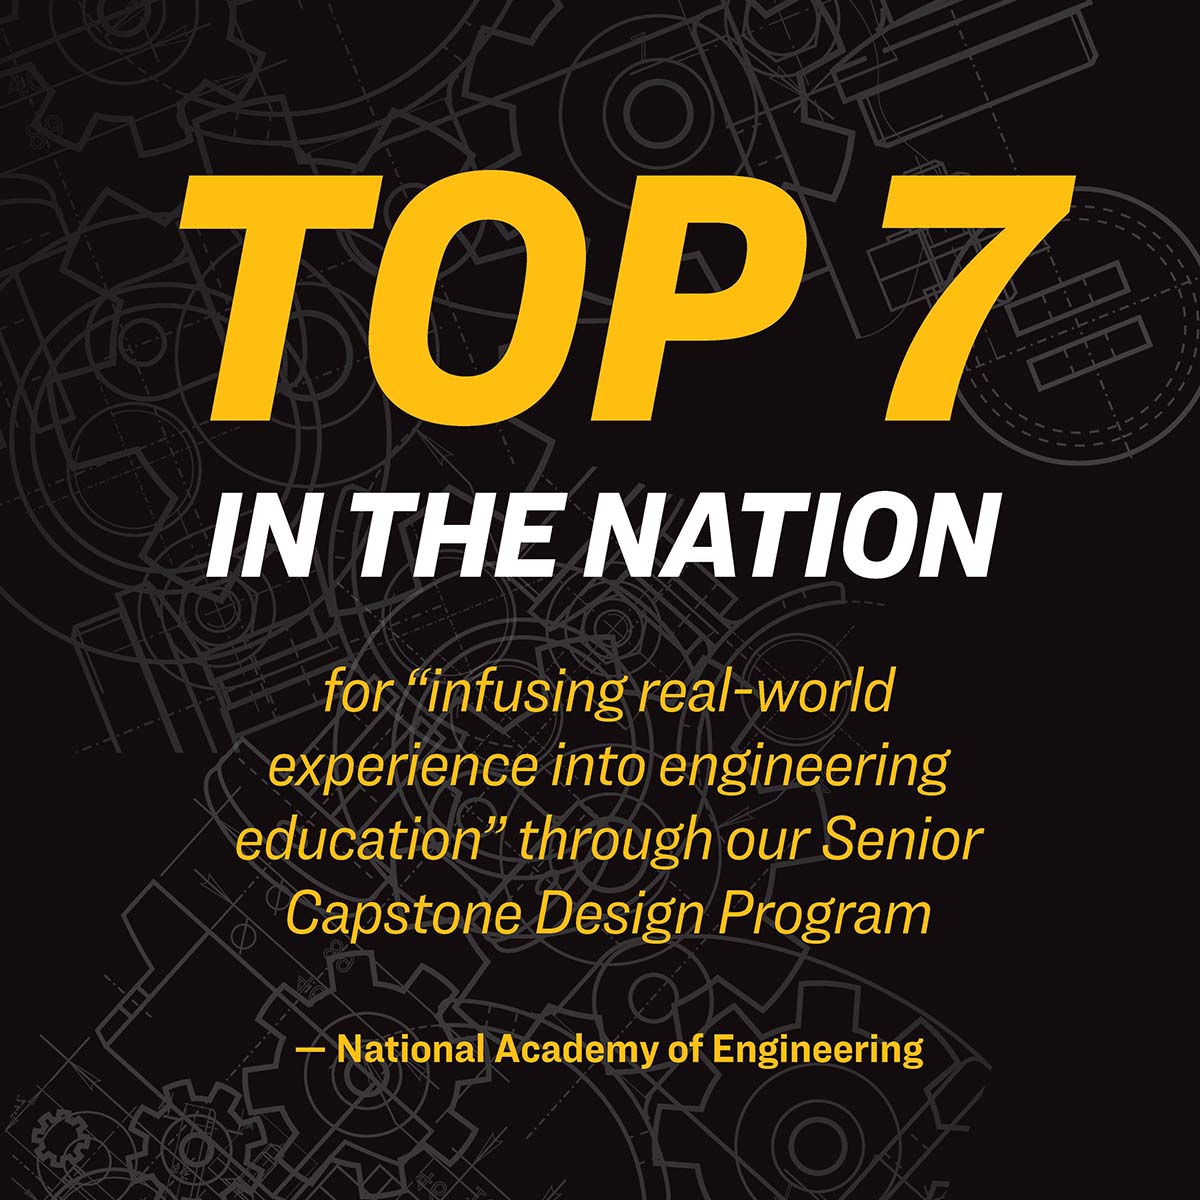 Top seven in the nation for "infusing real-world experience into engineering education" through our Senior Capstone Design Program from the National Academy of Engineering.